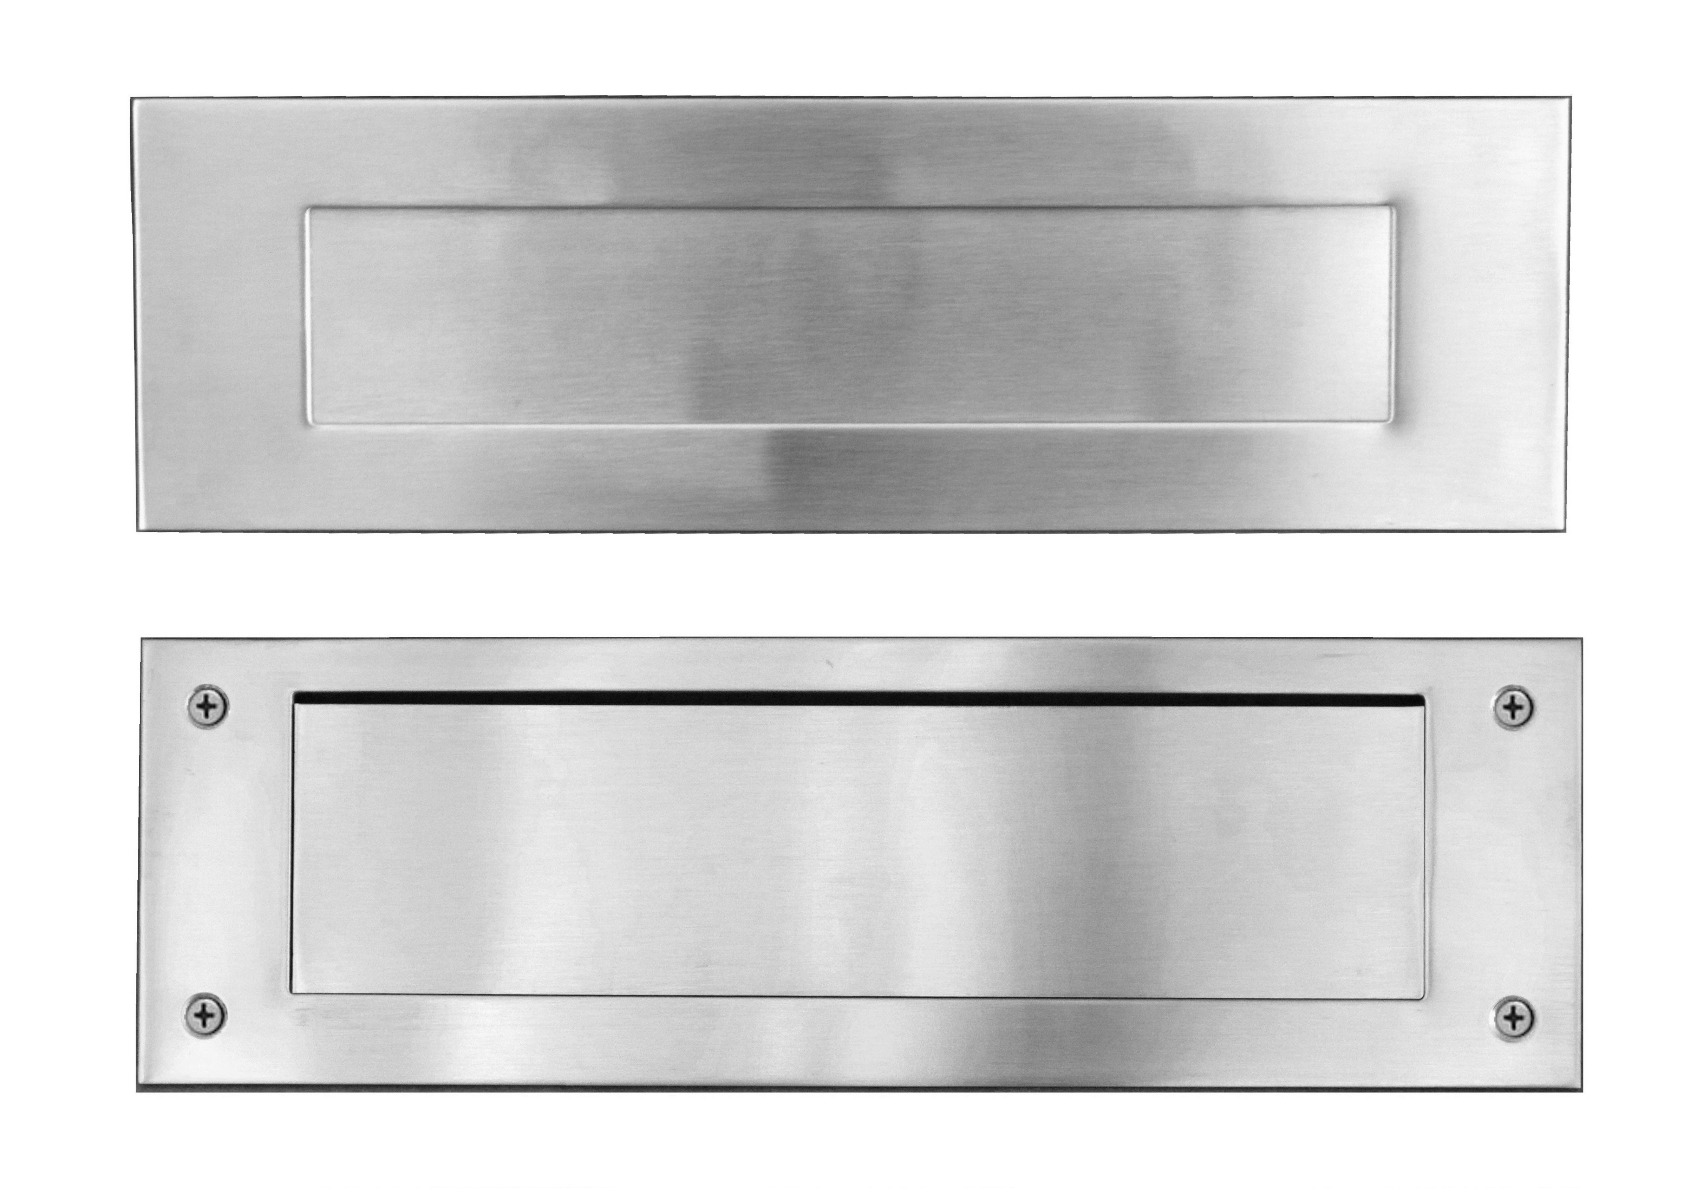 Stainless Steel Mail Slot (includes front & rear pieces)